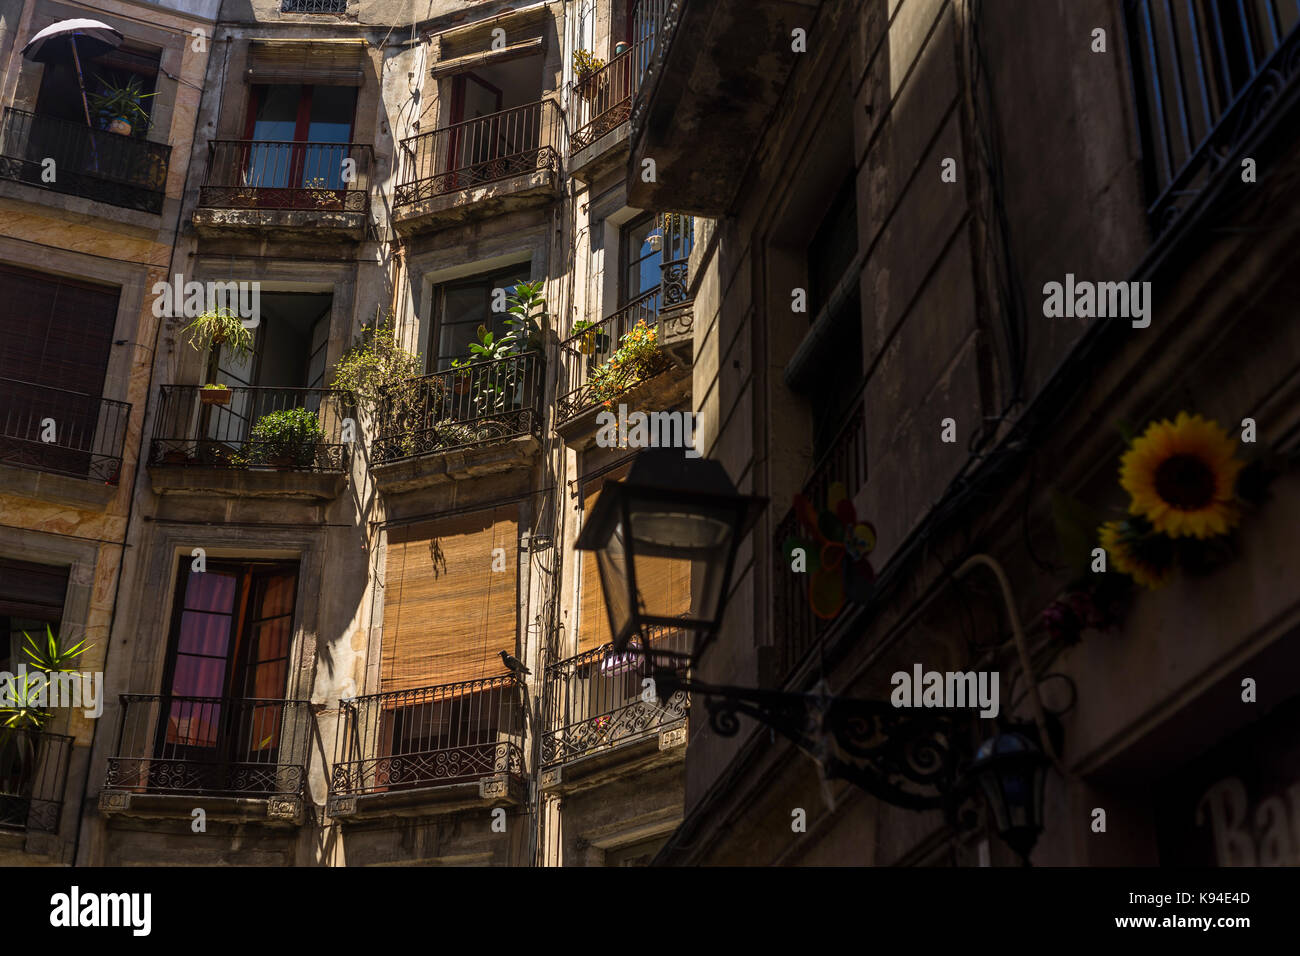 Balconies in the old town of Barcelona, Spain 2017 Stock Photo